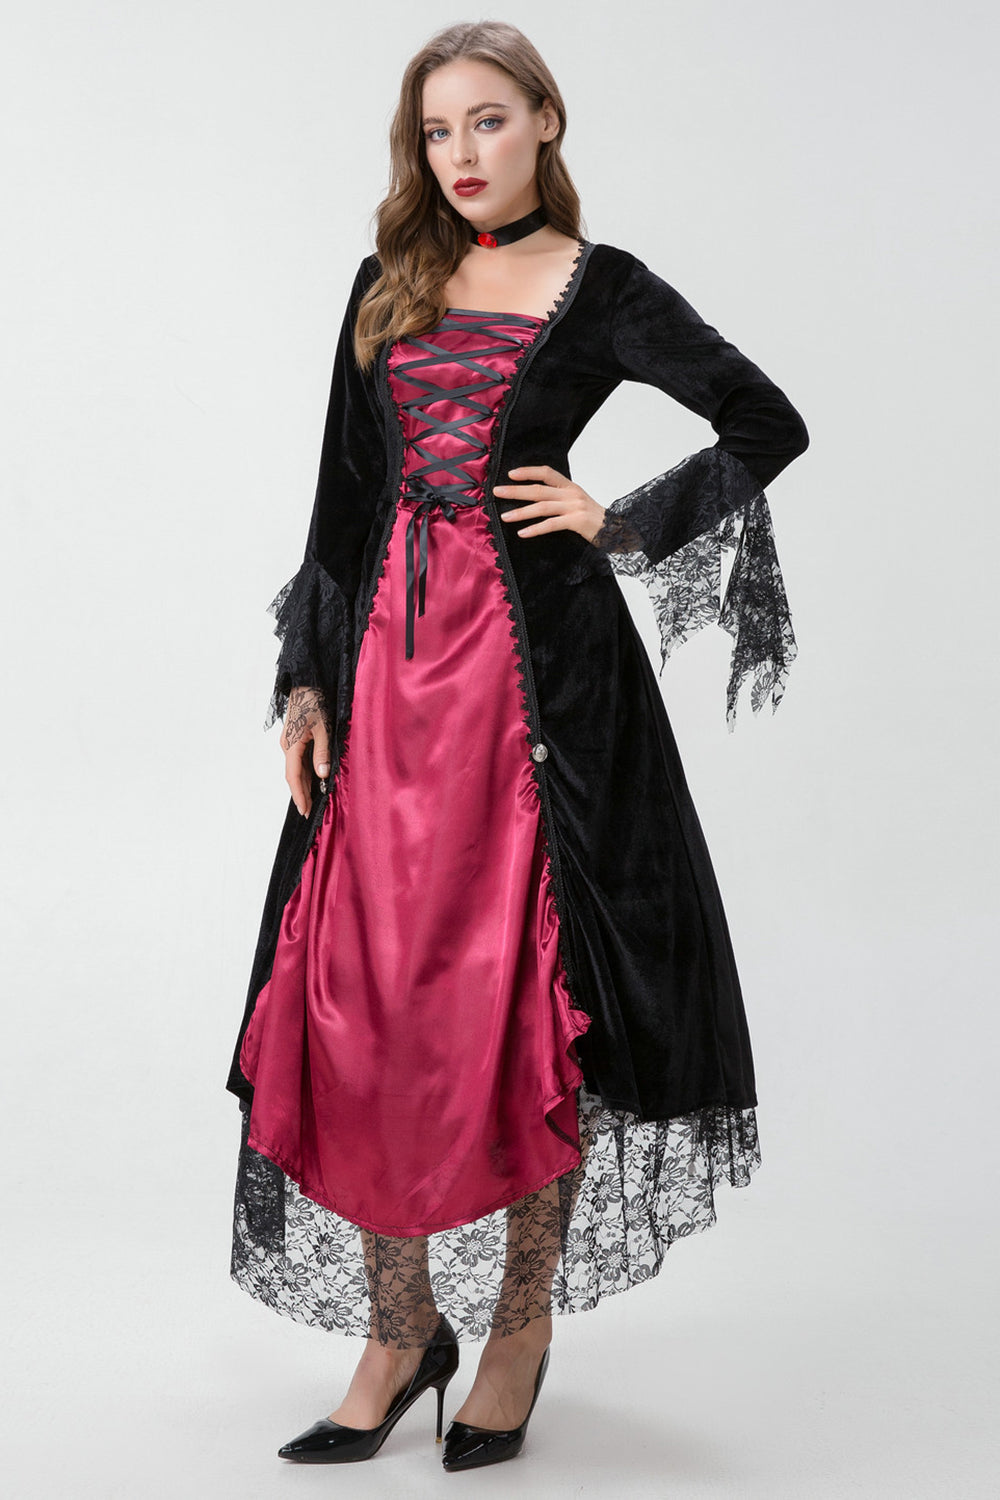 Gothic Burgundy Halloween Dress with Criss Cross Lace